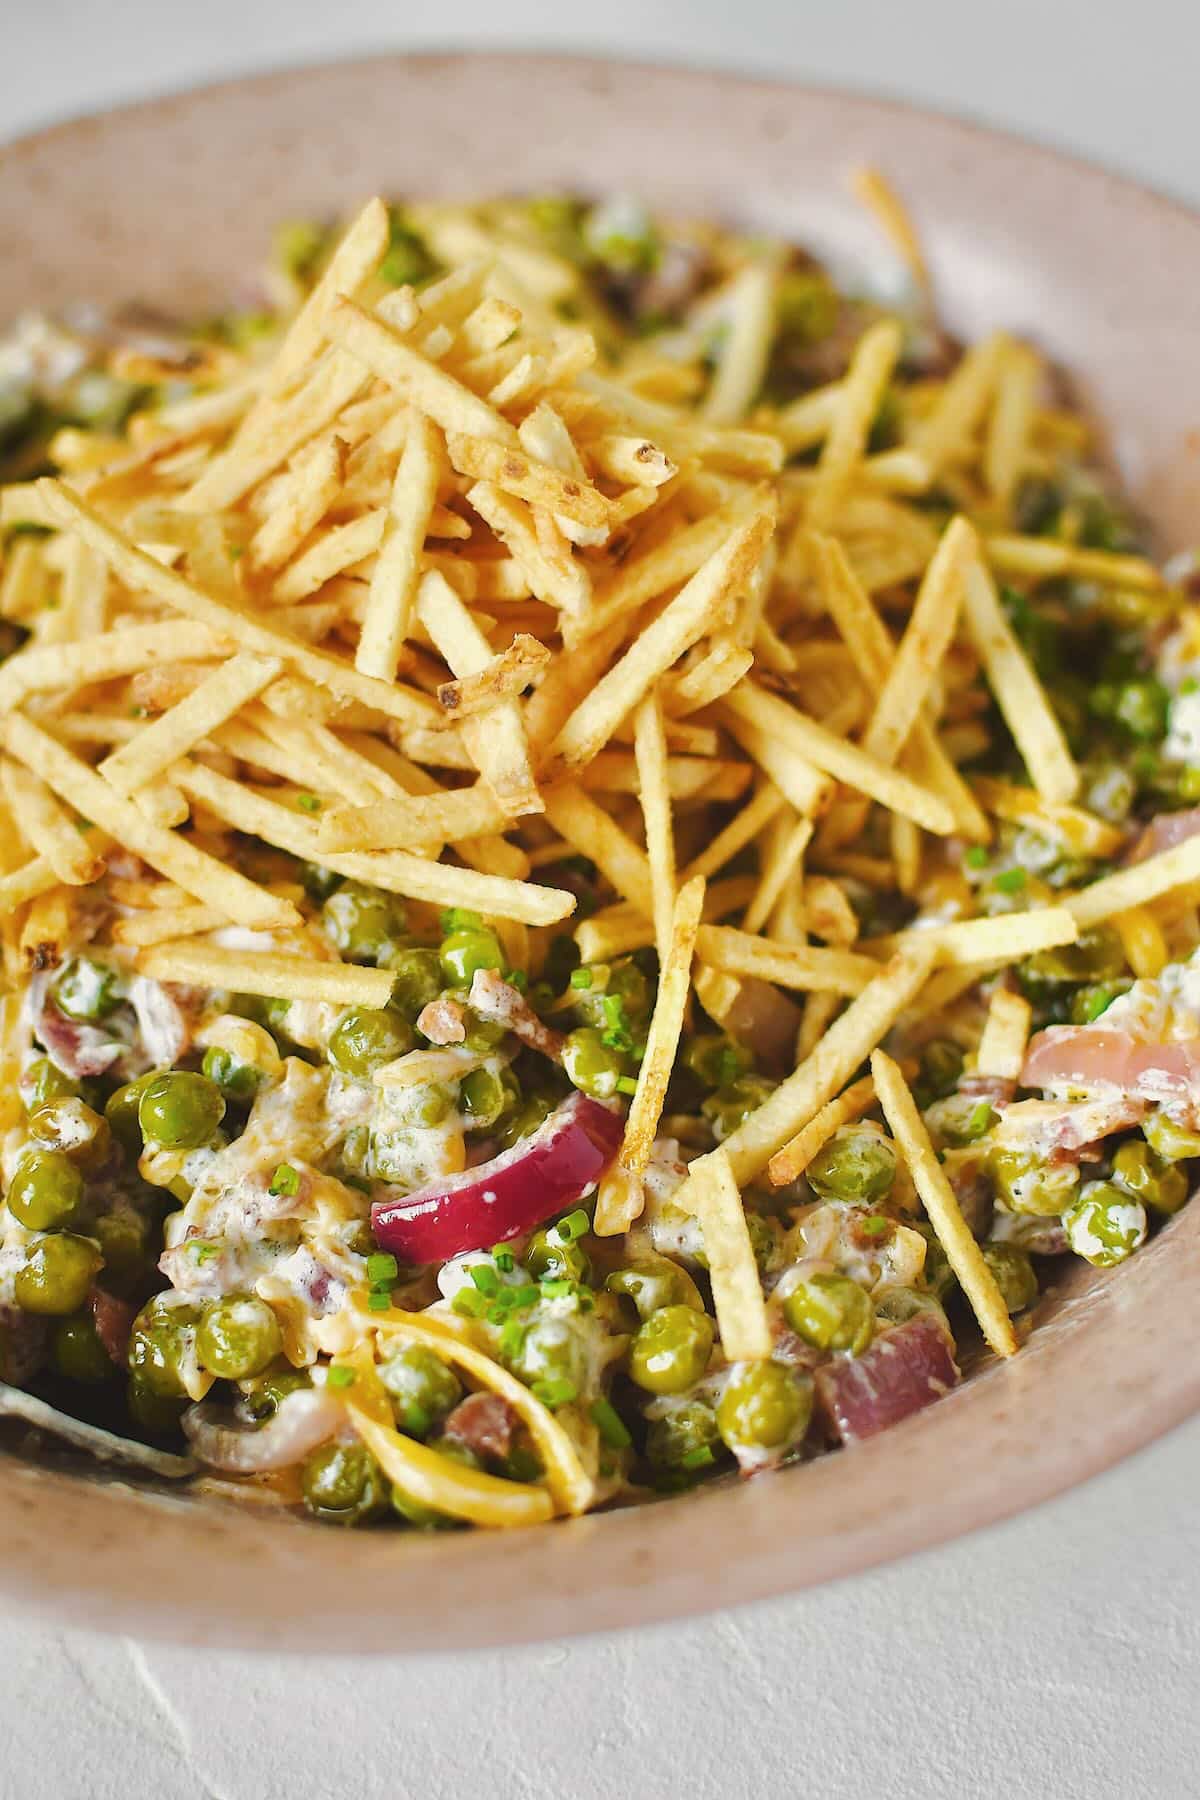 Bacon Pea Salad tossed together in a bowl and topped with shoestring potatoes.